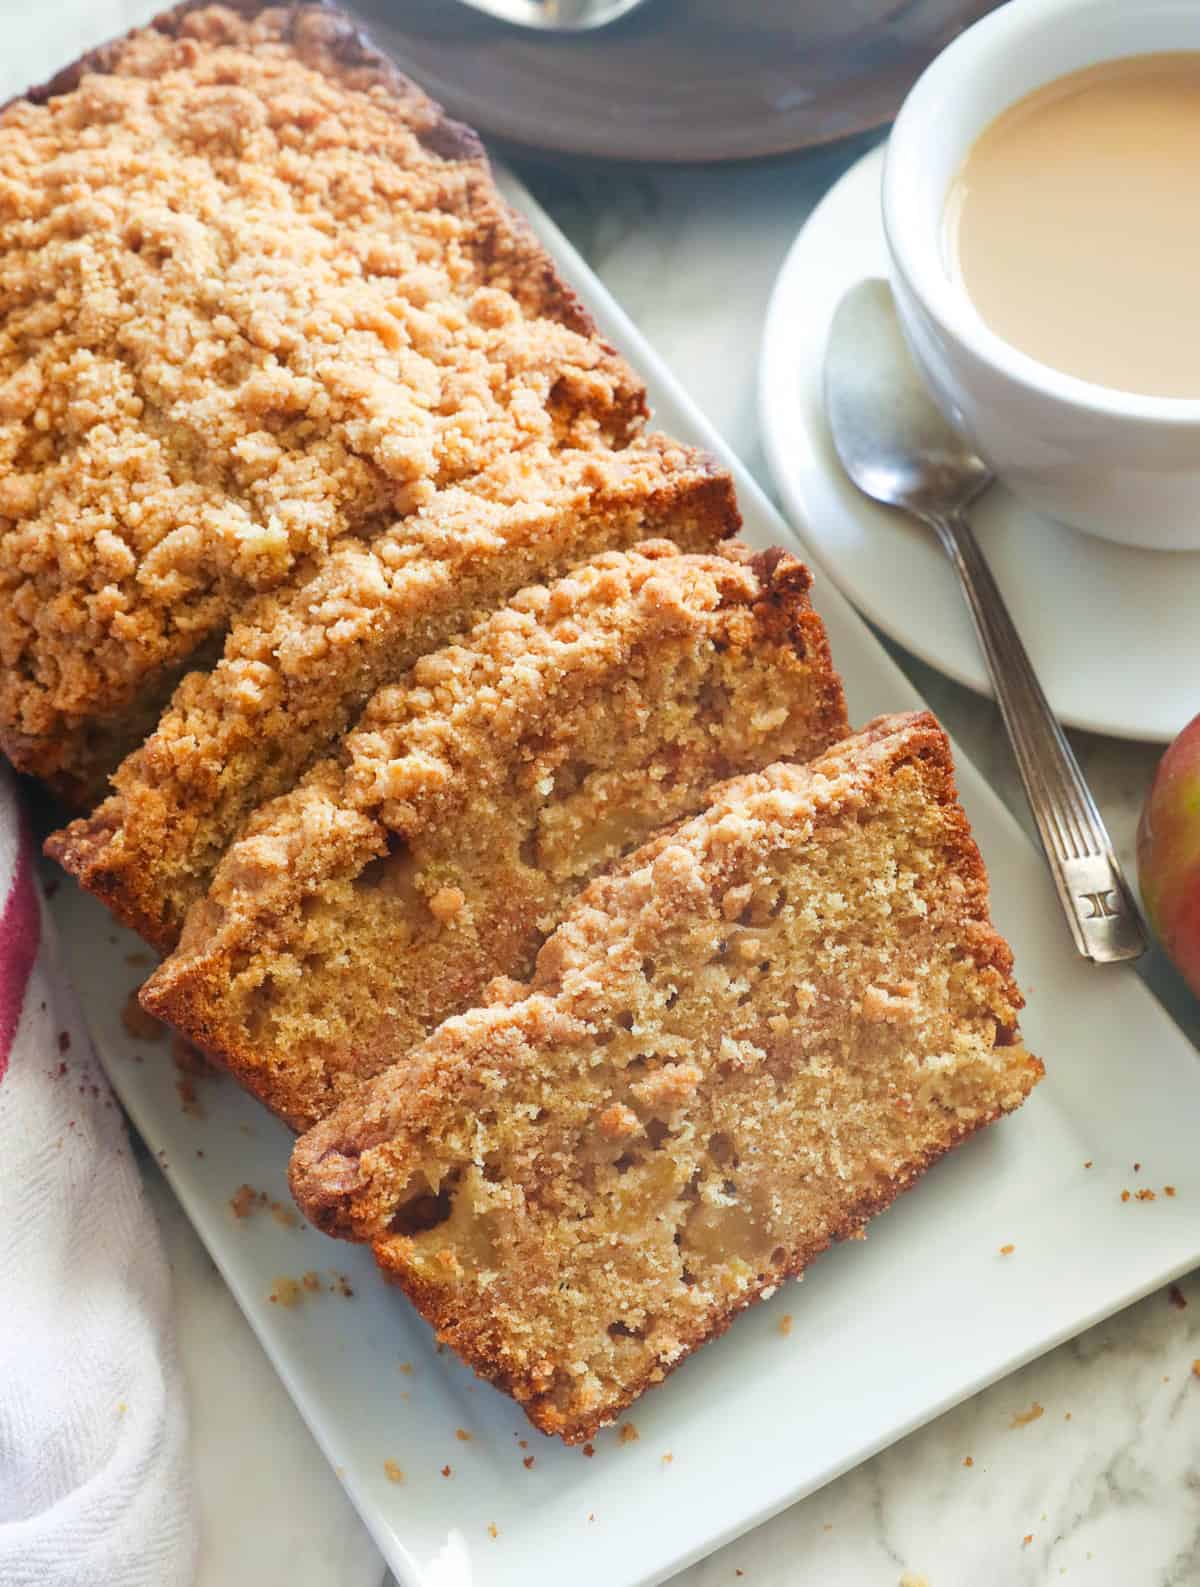 Freshly sliced apple bread with a cup of coffee to tempt your tastebuds